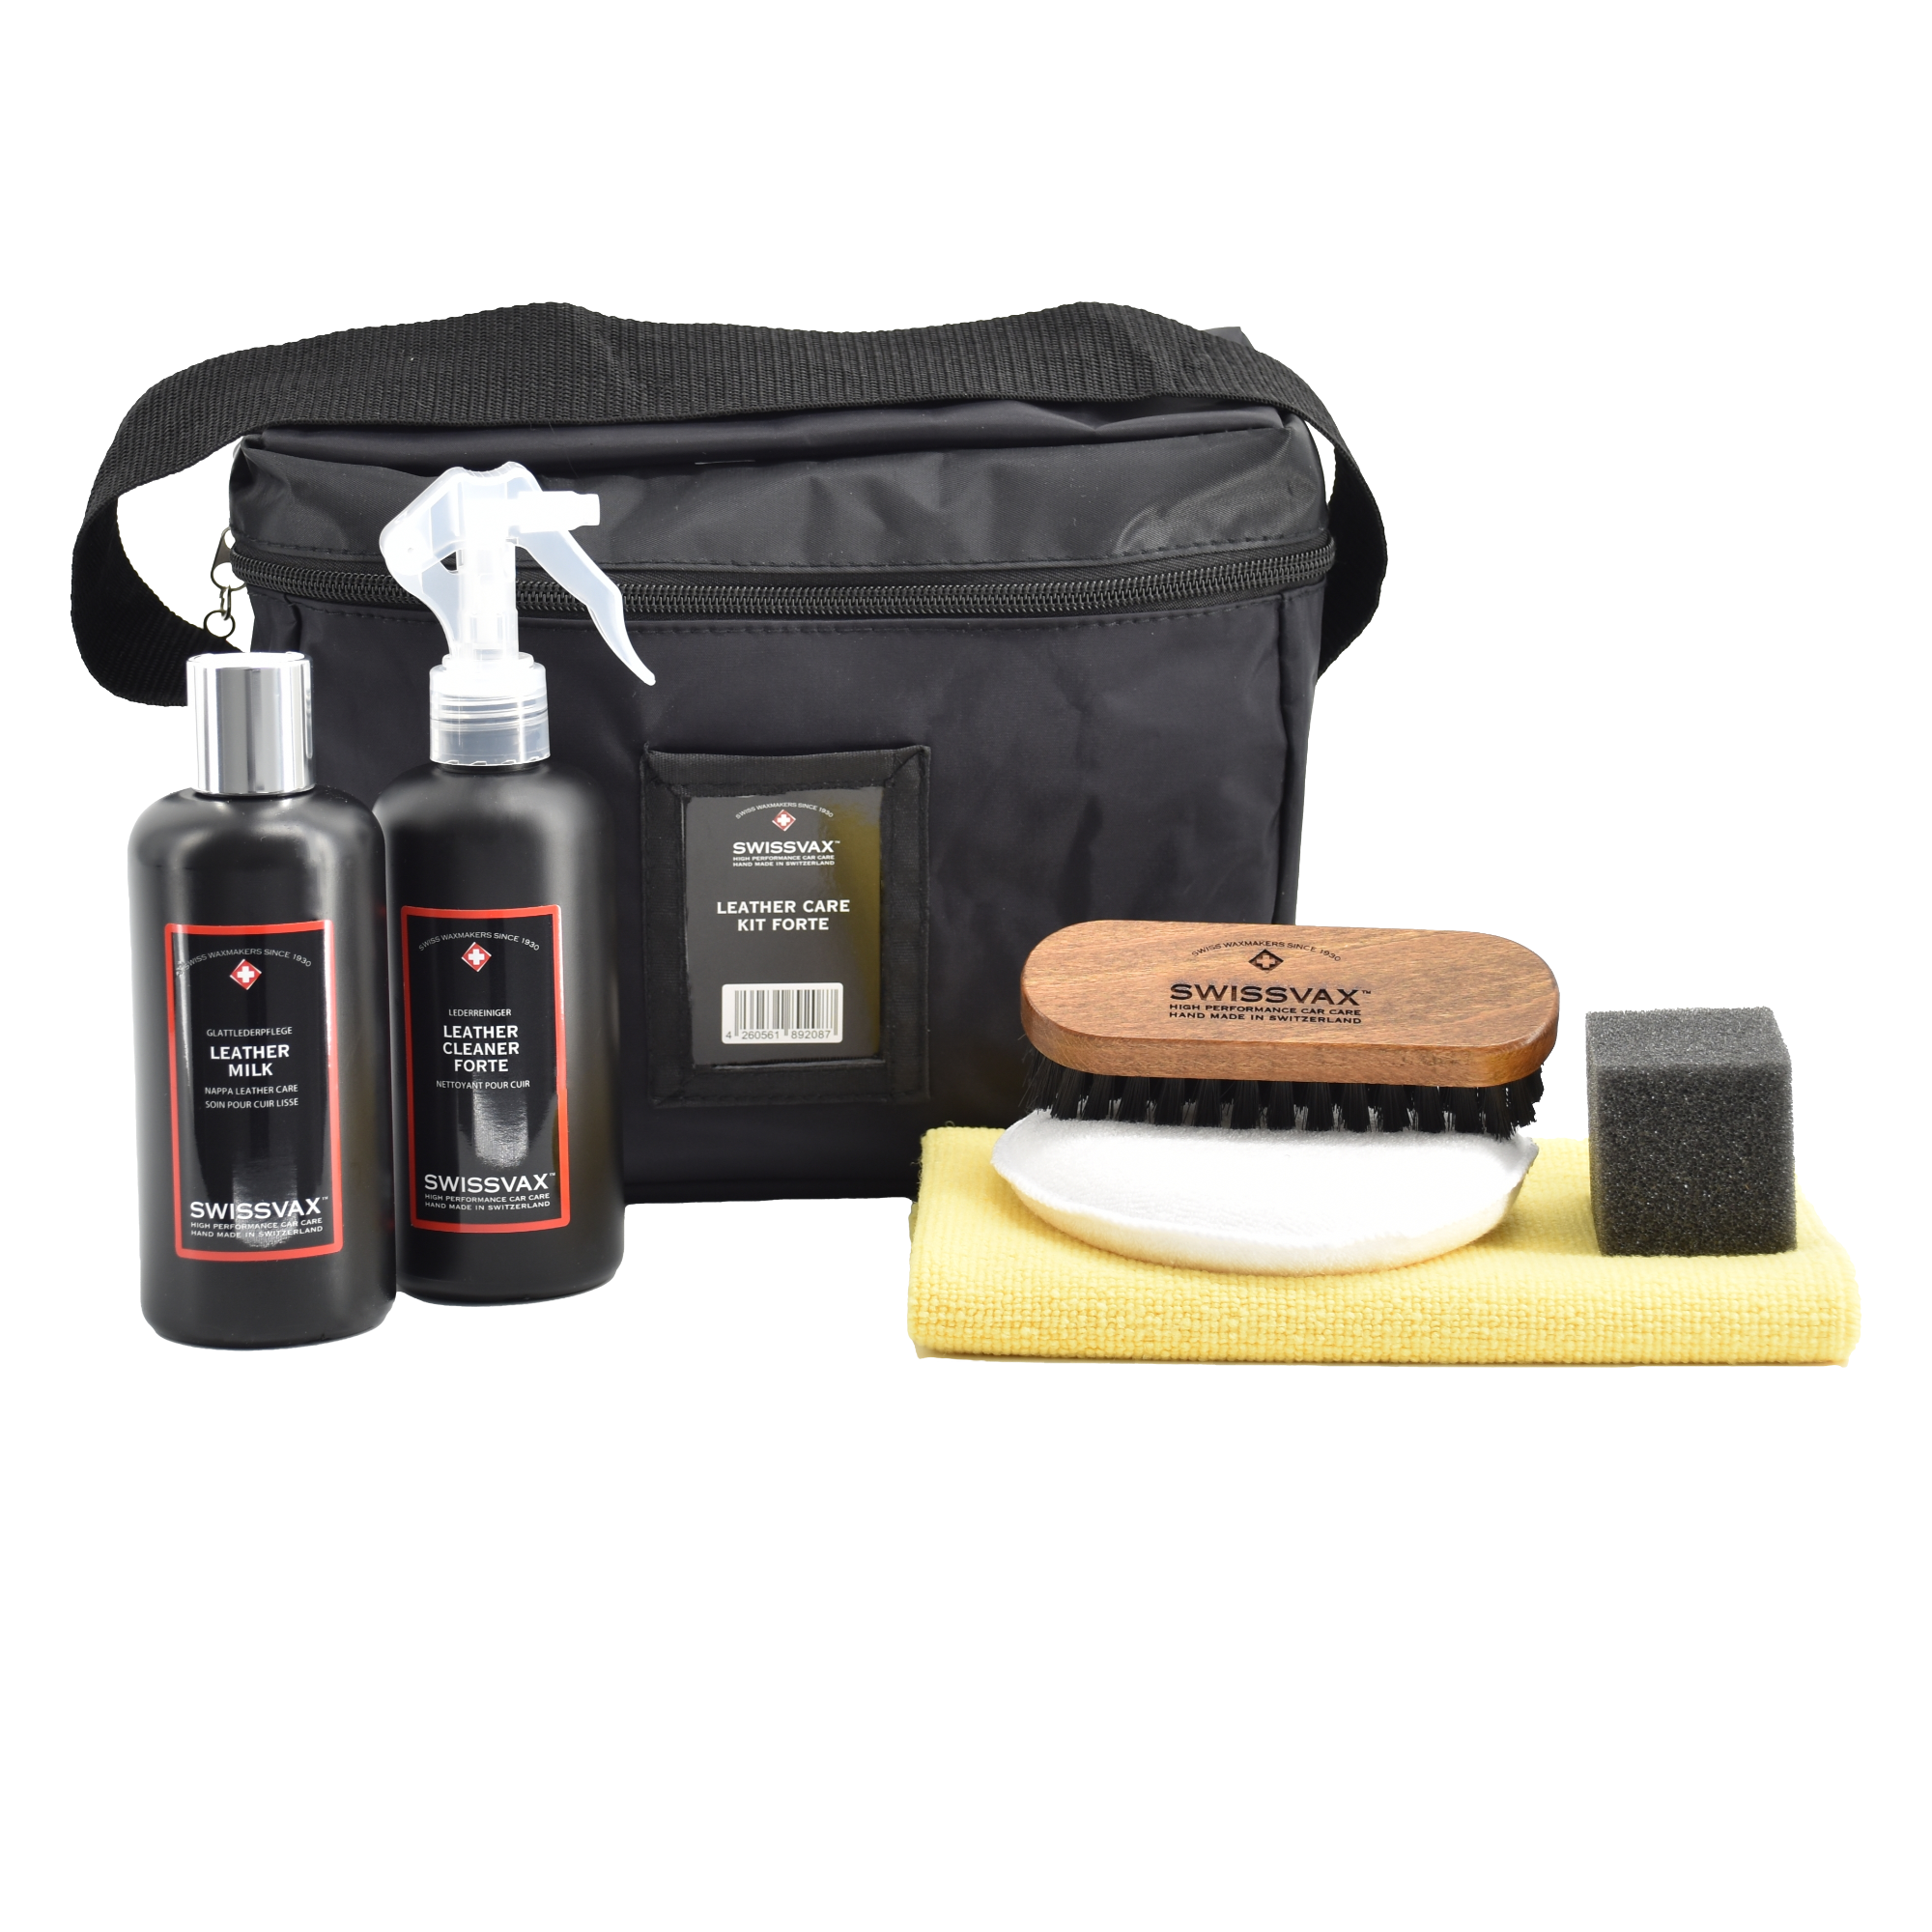 Swissvax LEATHER CARE KIT FORTE (Strong formula)